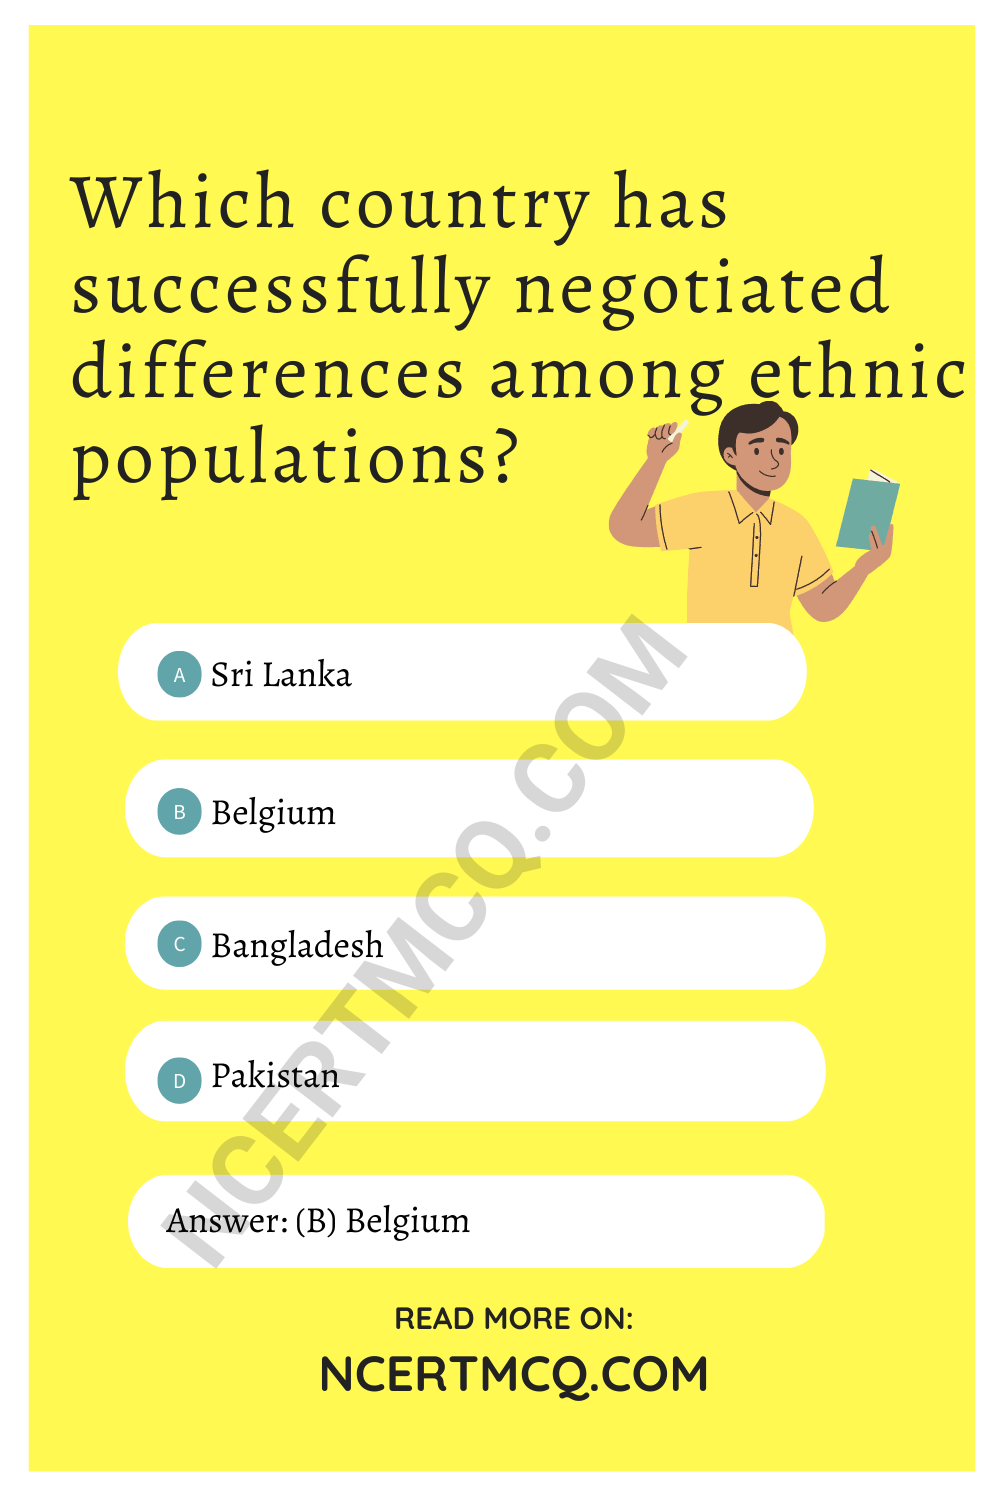 Which country has successfully negotiated differences among ethnic populations?